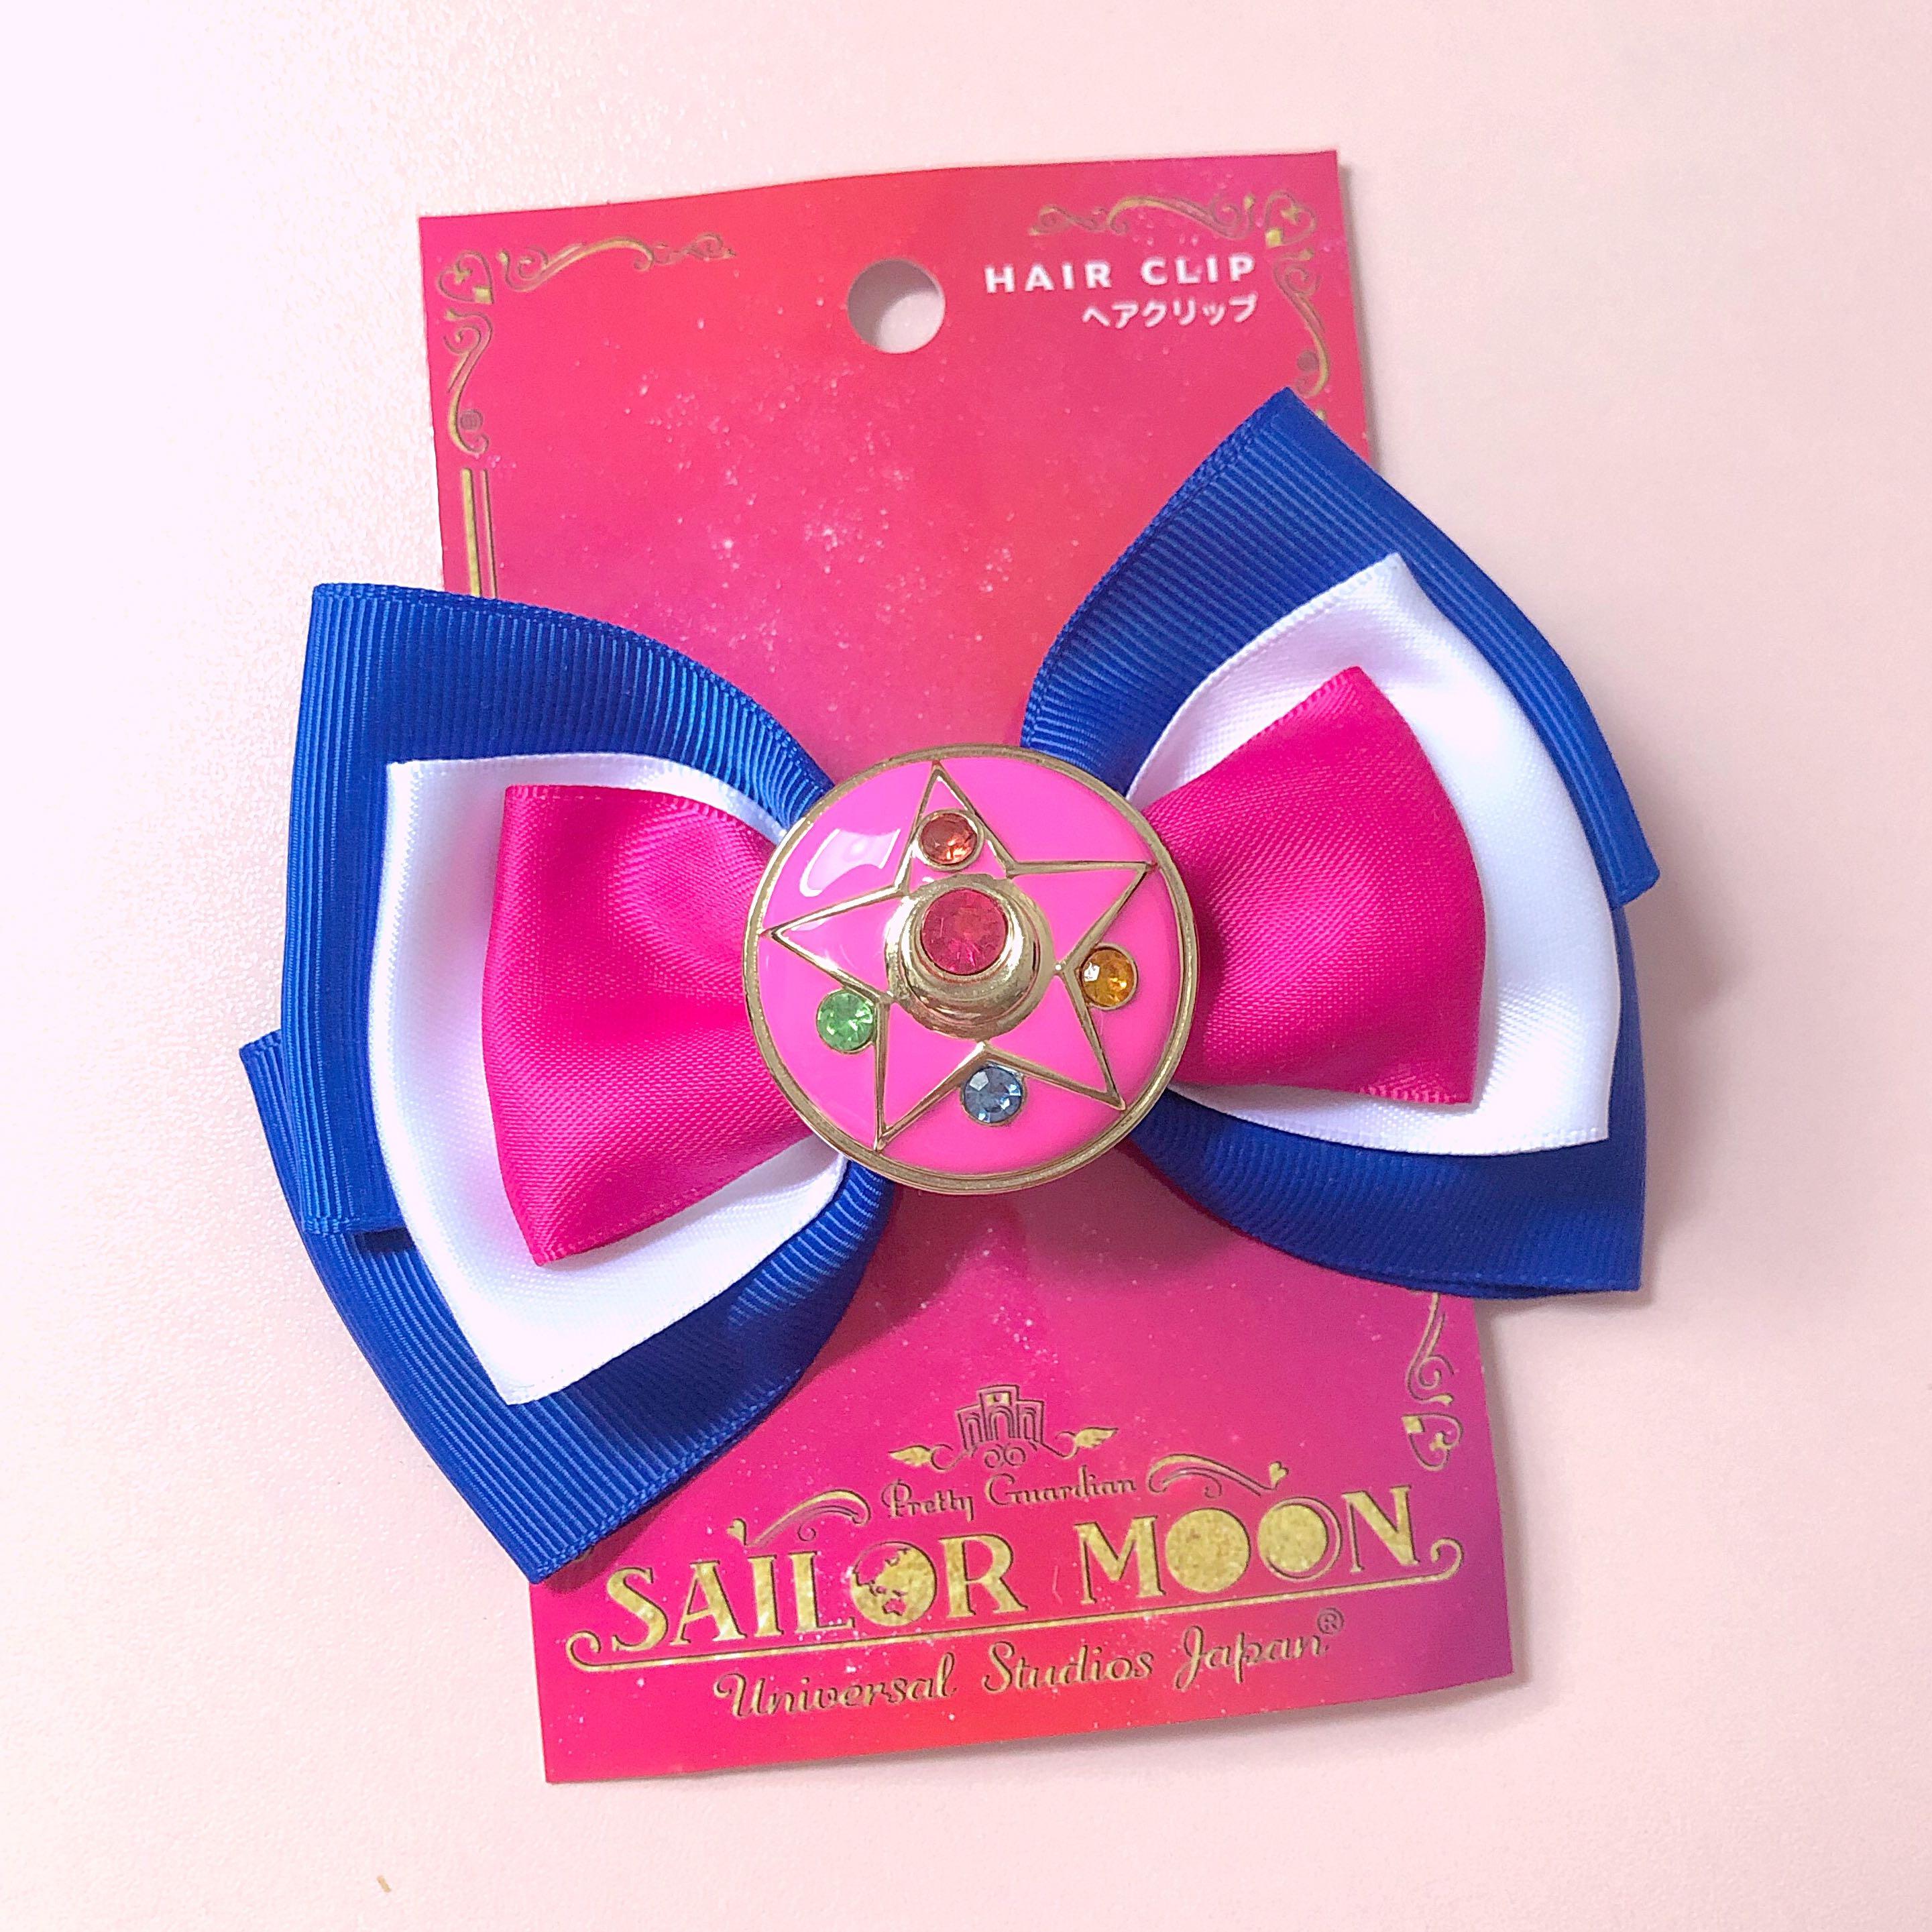 Details about   Sailor Moon Universal Studios Japan Limited Hair Clip Hair Pin USJ Pink New F/S 